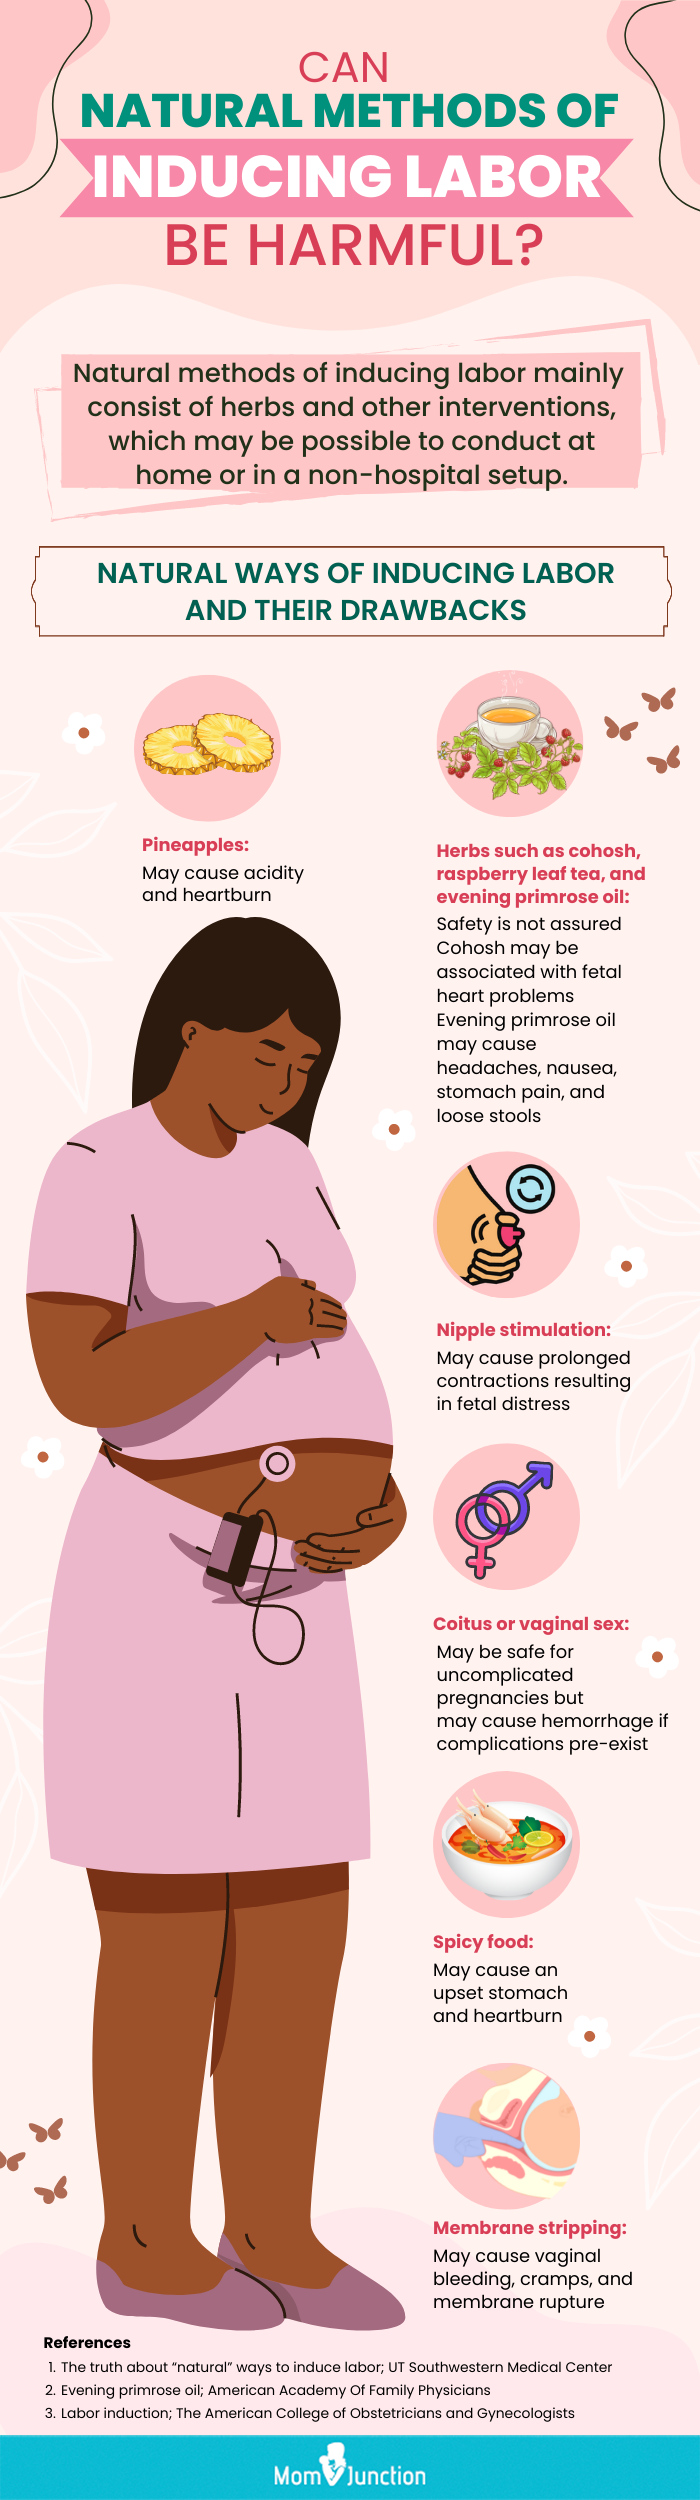 can natural methods of inducing labor be harmful [infographic]